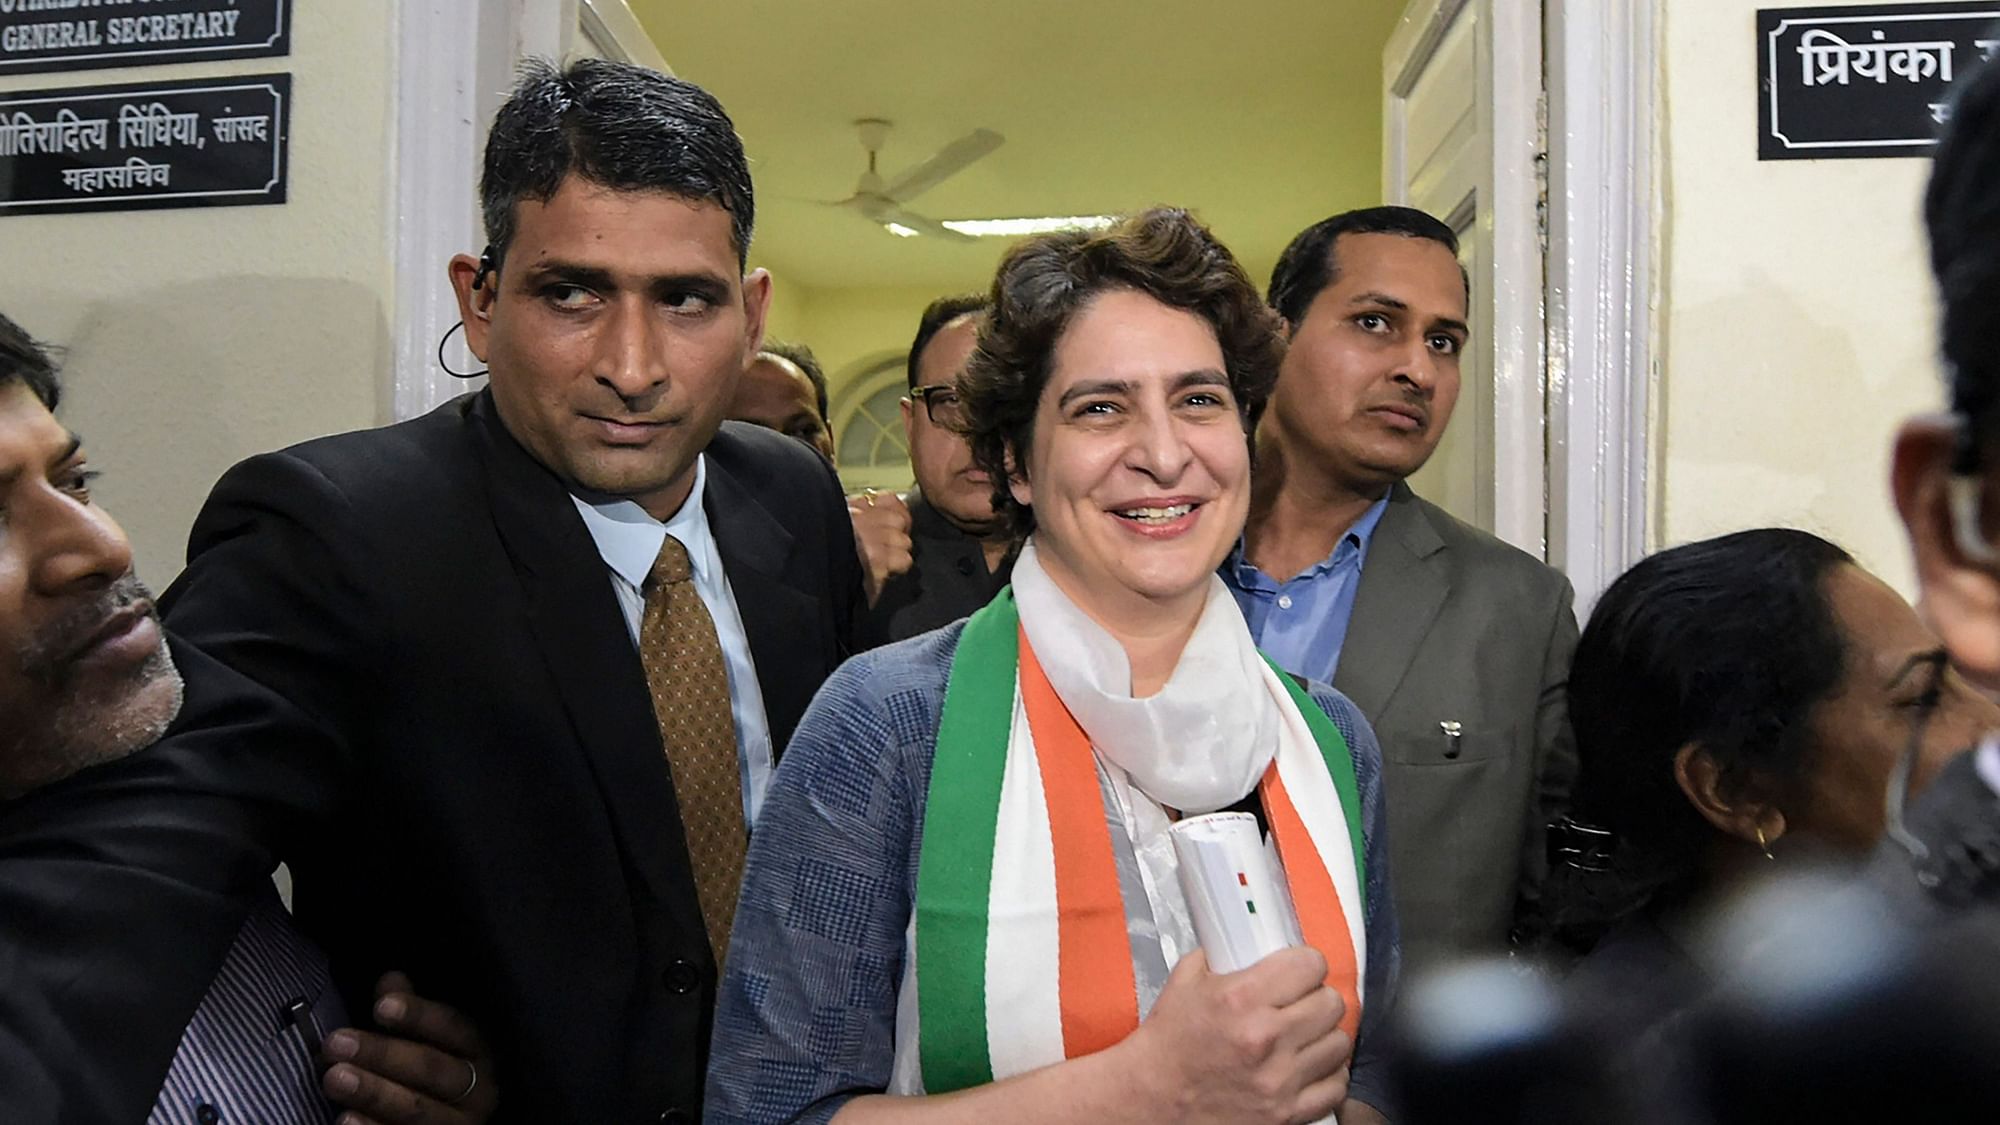  Priyanka Gandhi arrives at her office at AICC headquarters in New Delhi on Wednesday, 6 February.&nbsp;